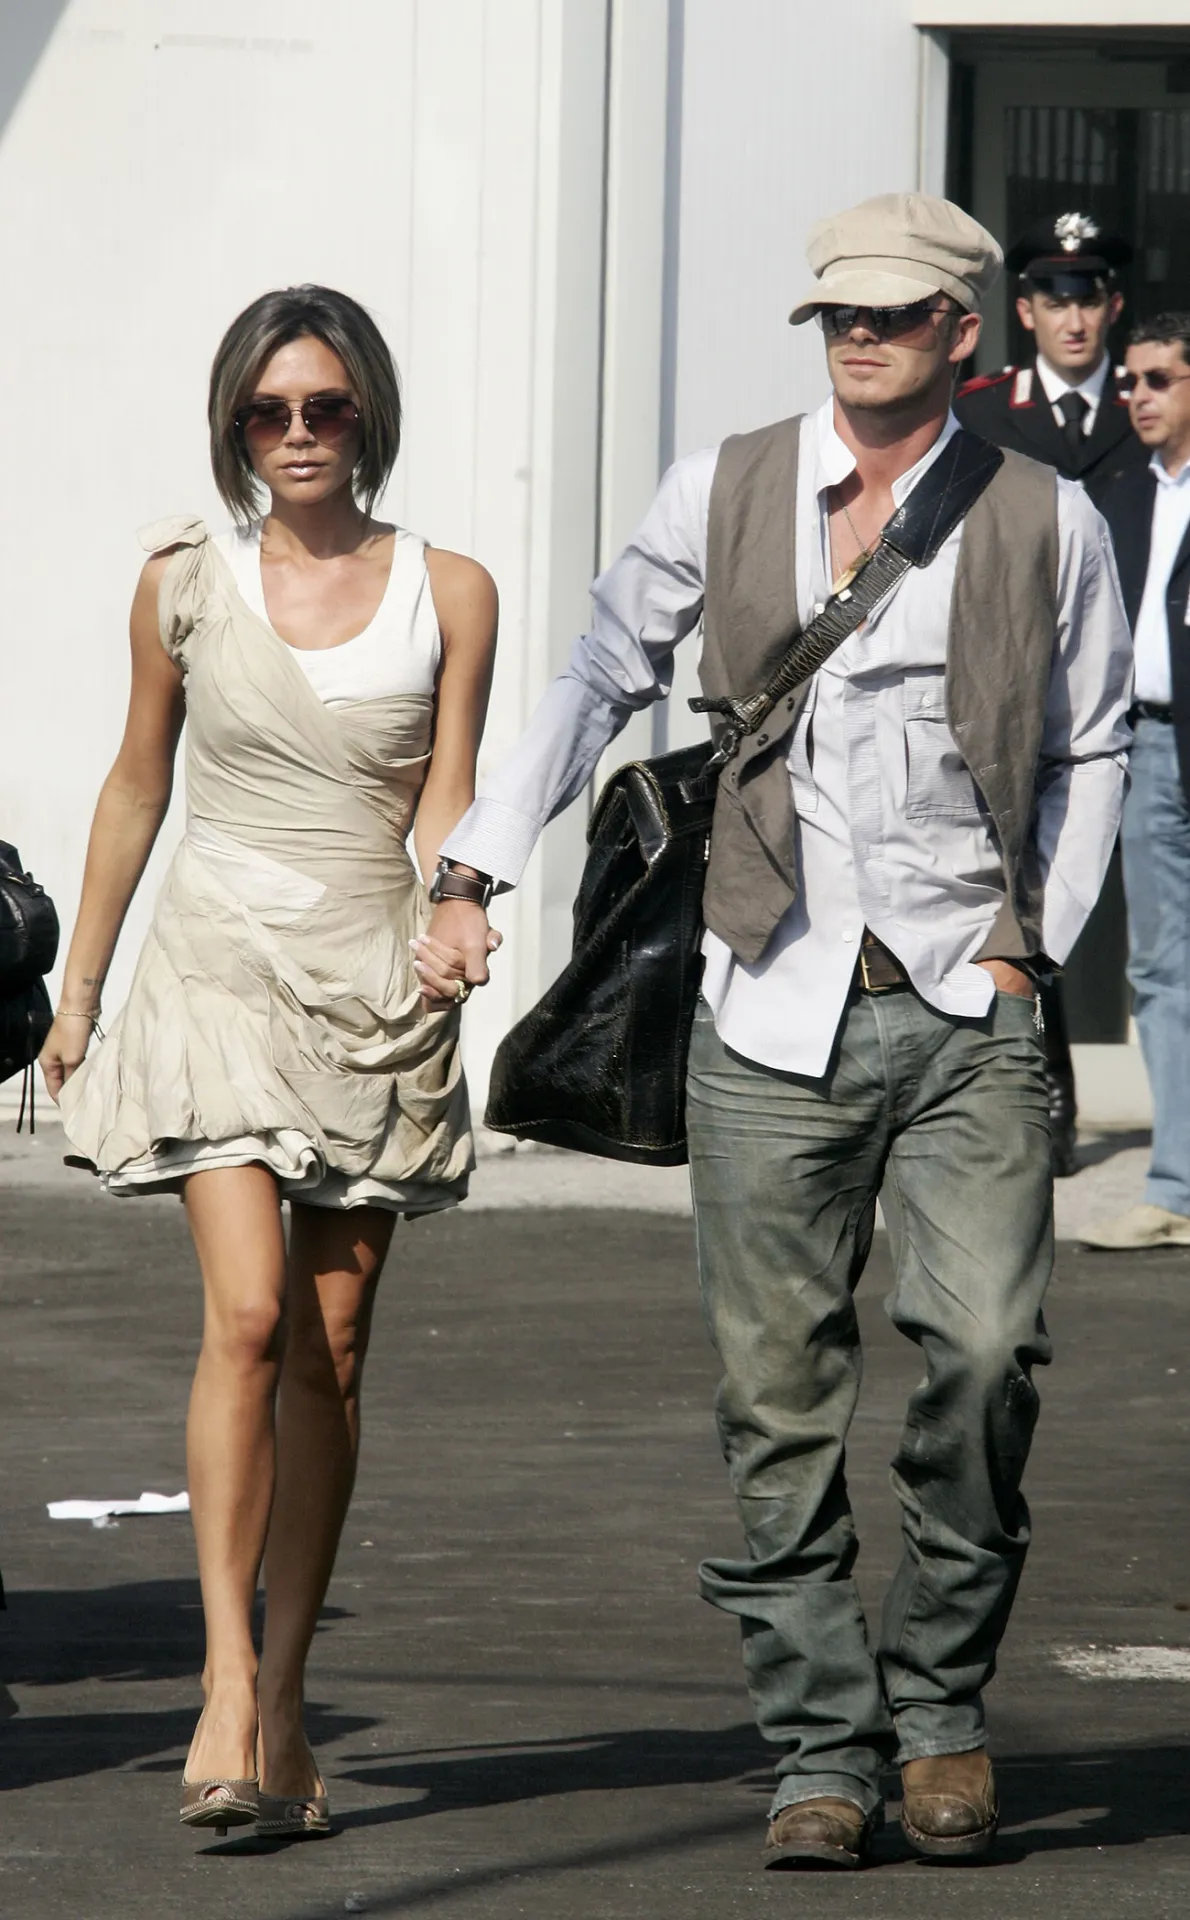 Posh and Becks: Revisiting Their Iconic Y2K Style